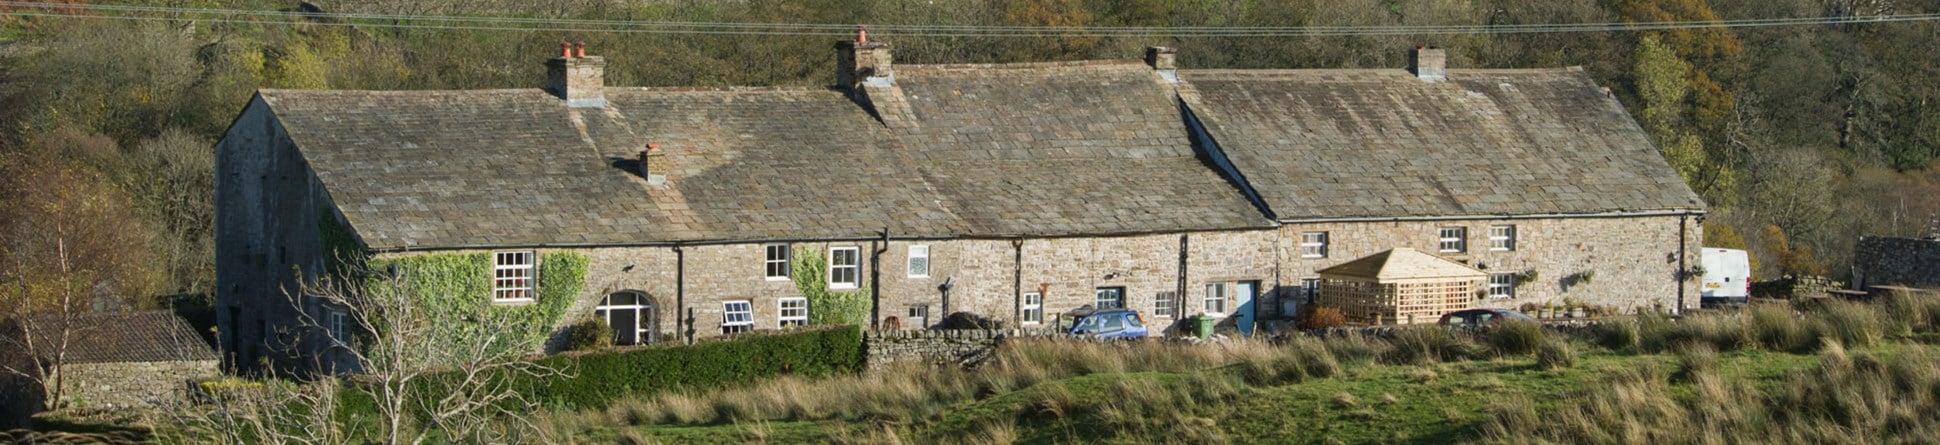 A row of stone cottages with moorland in the foreground and background.